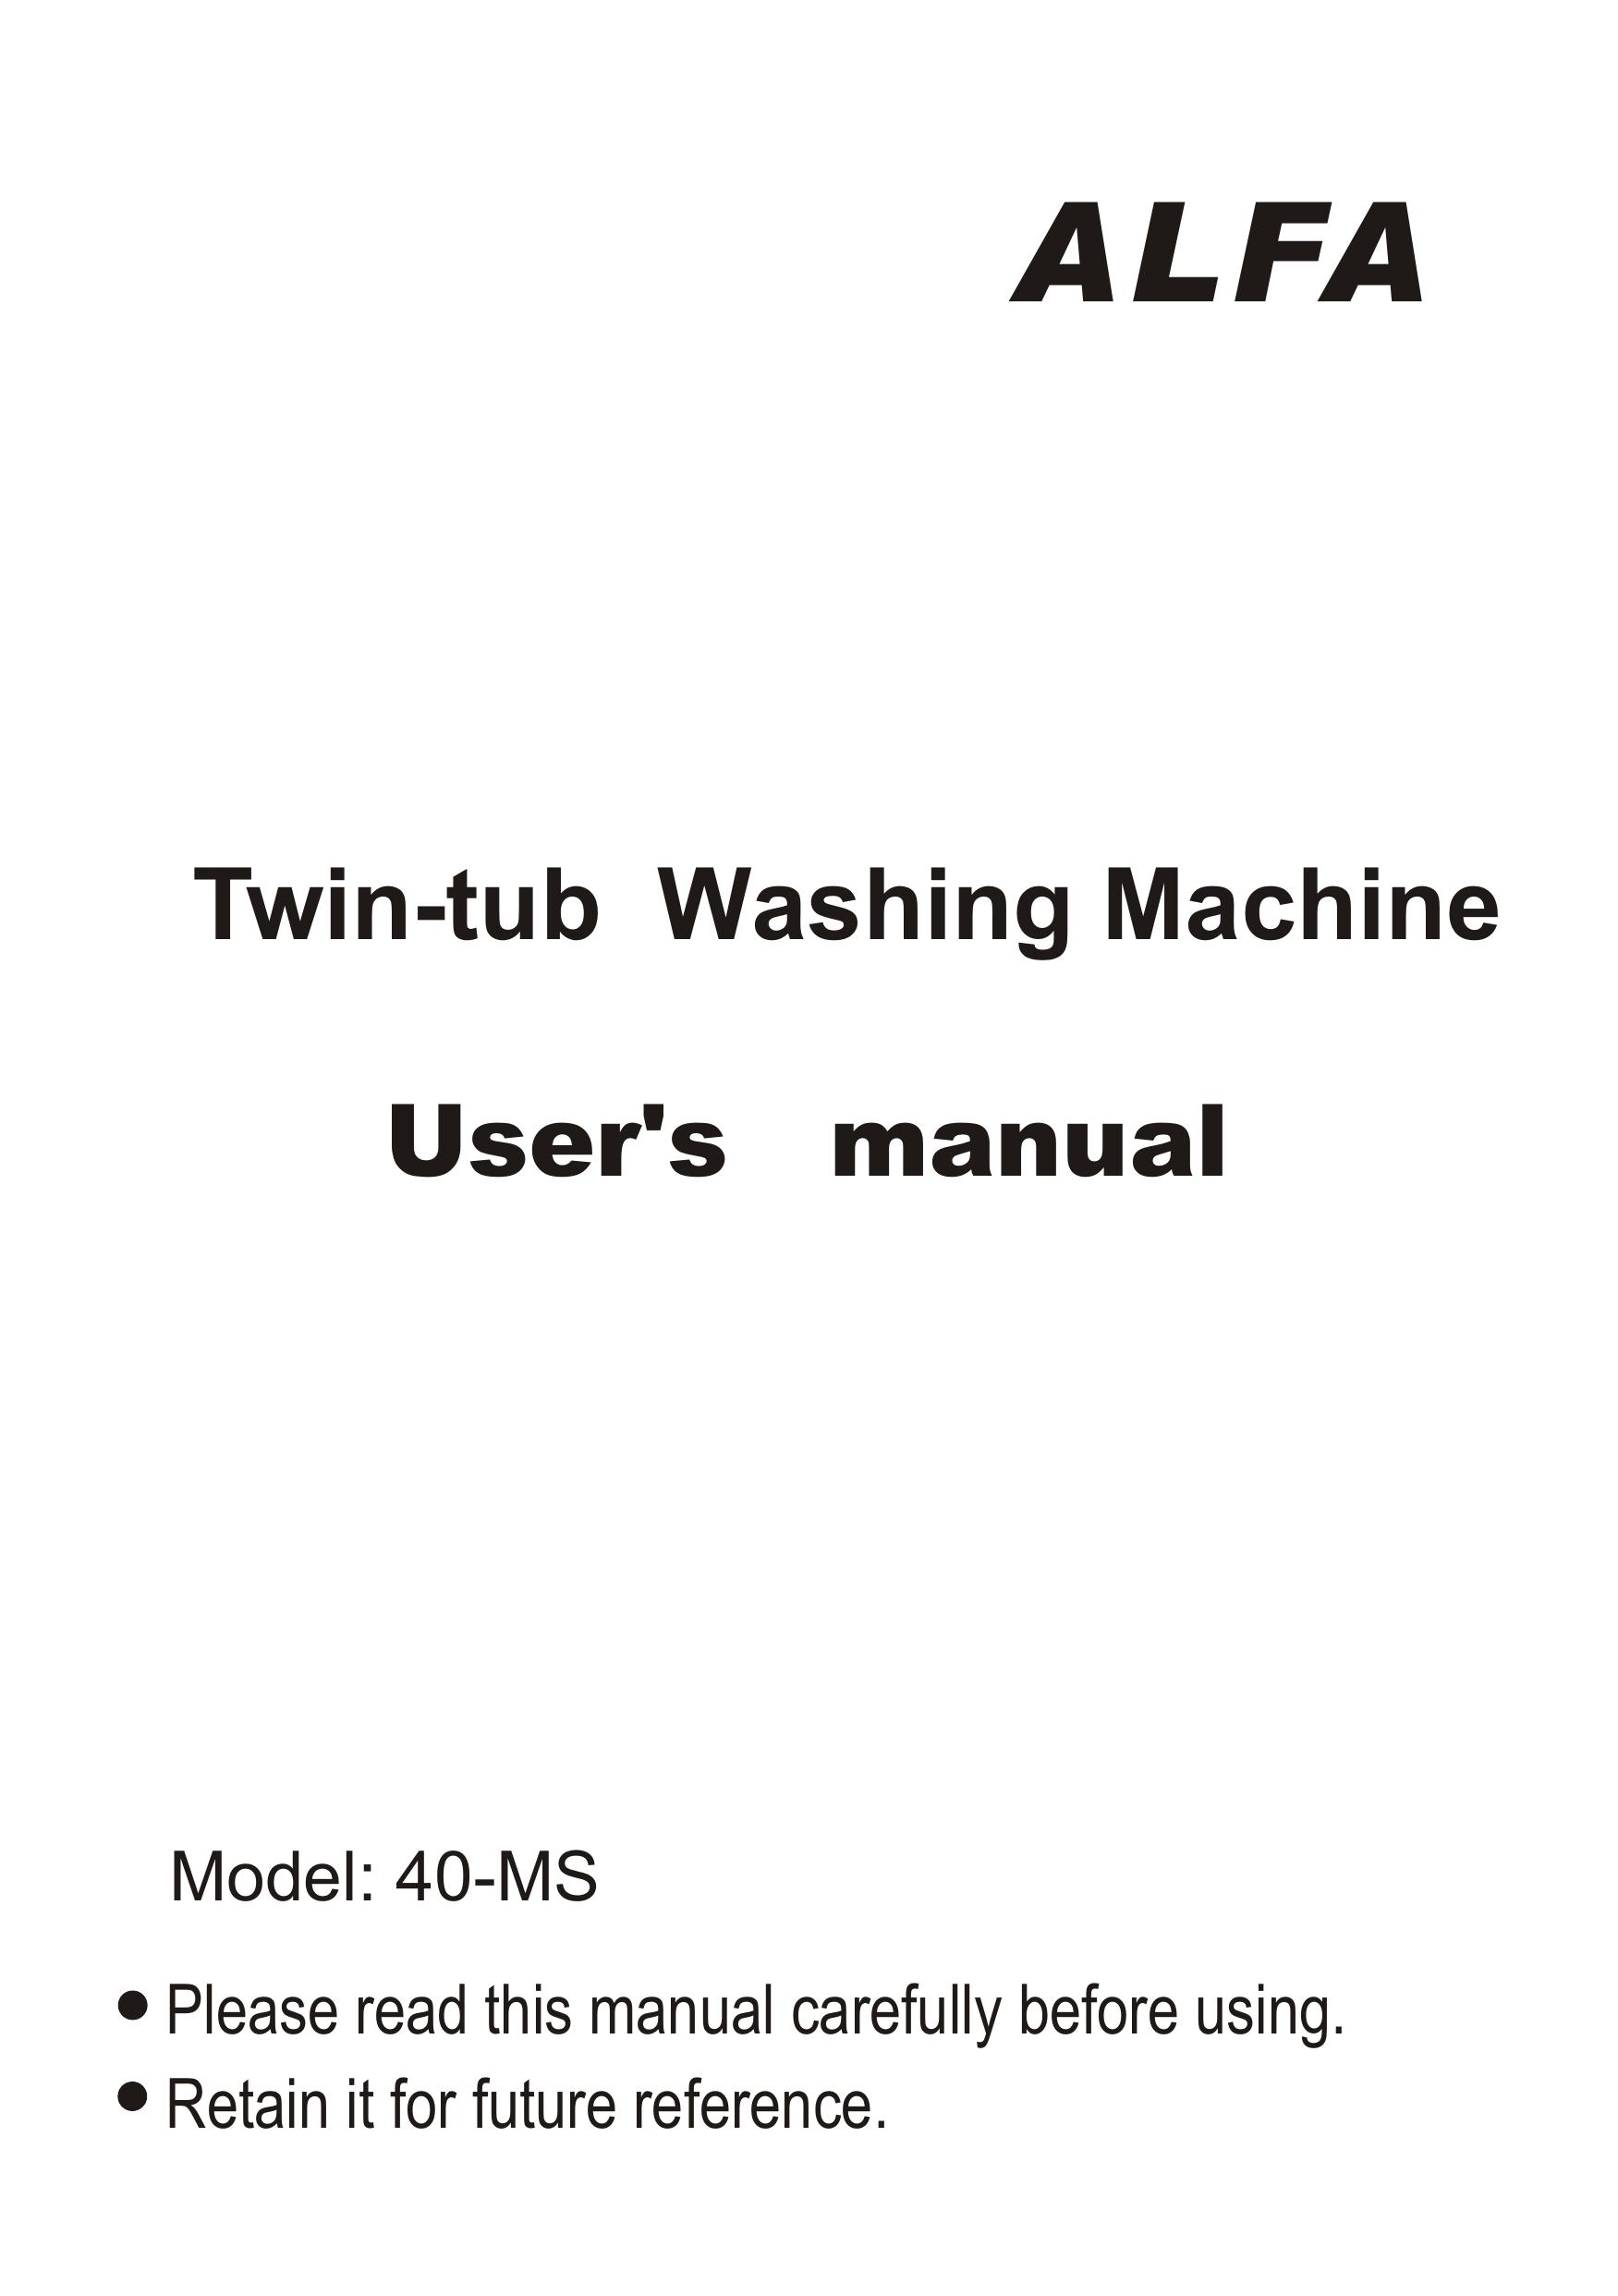 ALFA 40-MS Washer/Dryer User Manual (Page 1)